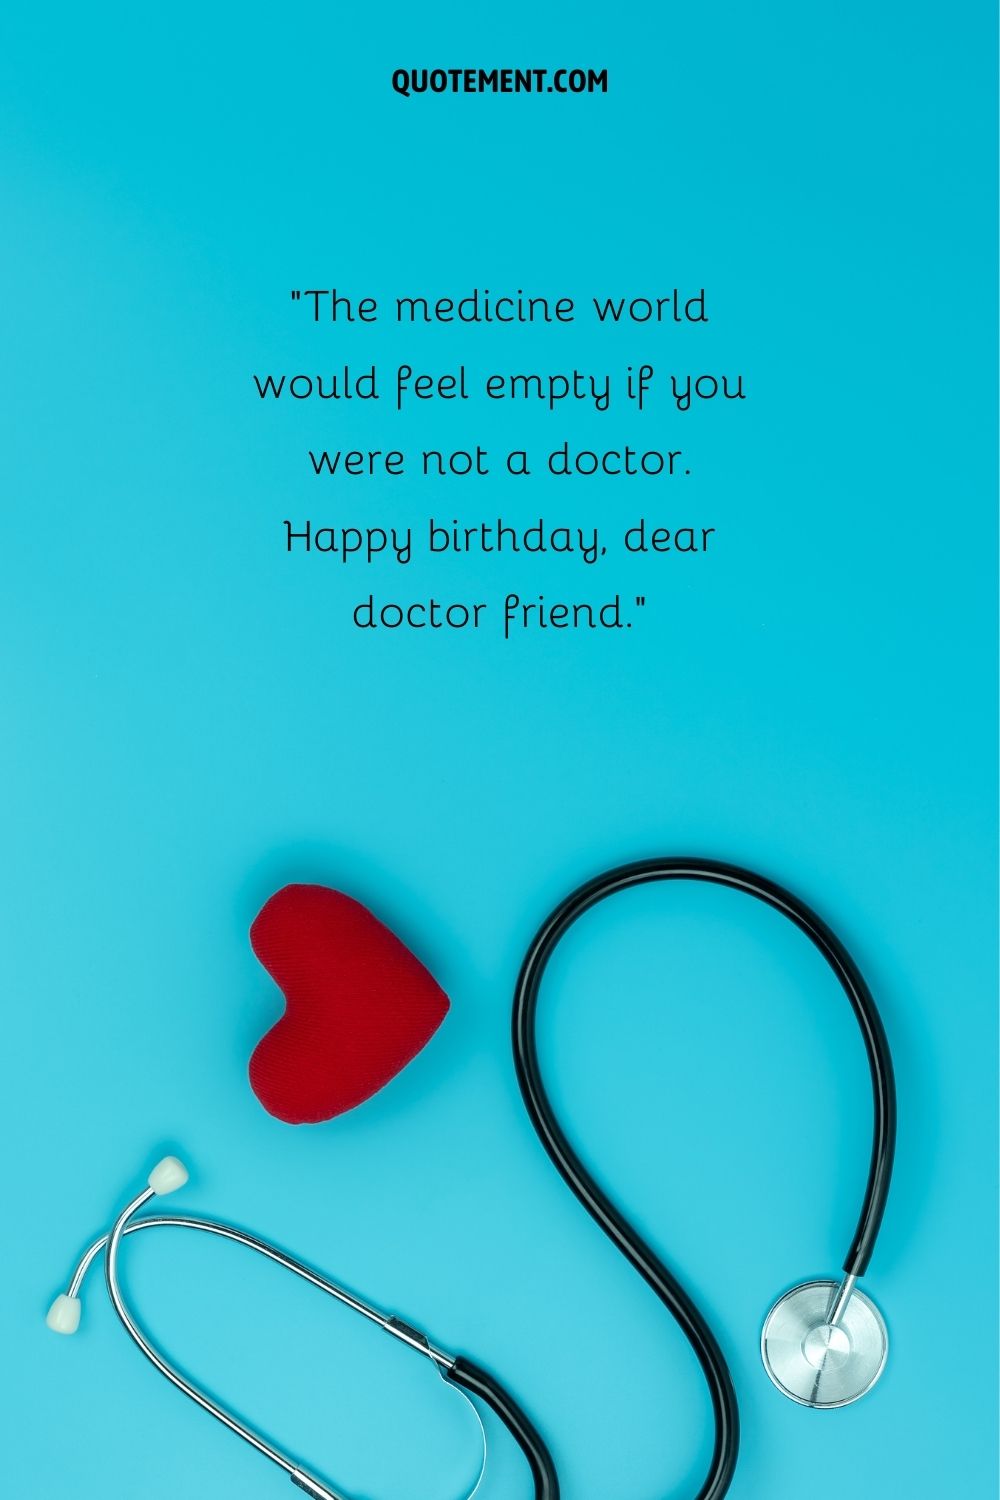 heartfelt message for a friend who is in medical field representing happy birthday doctor friend